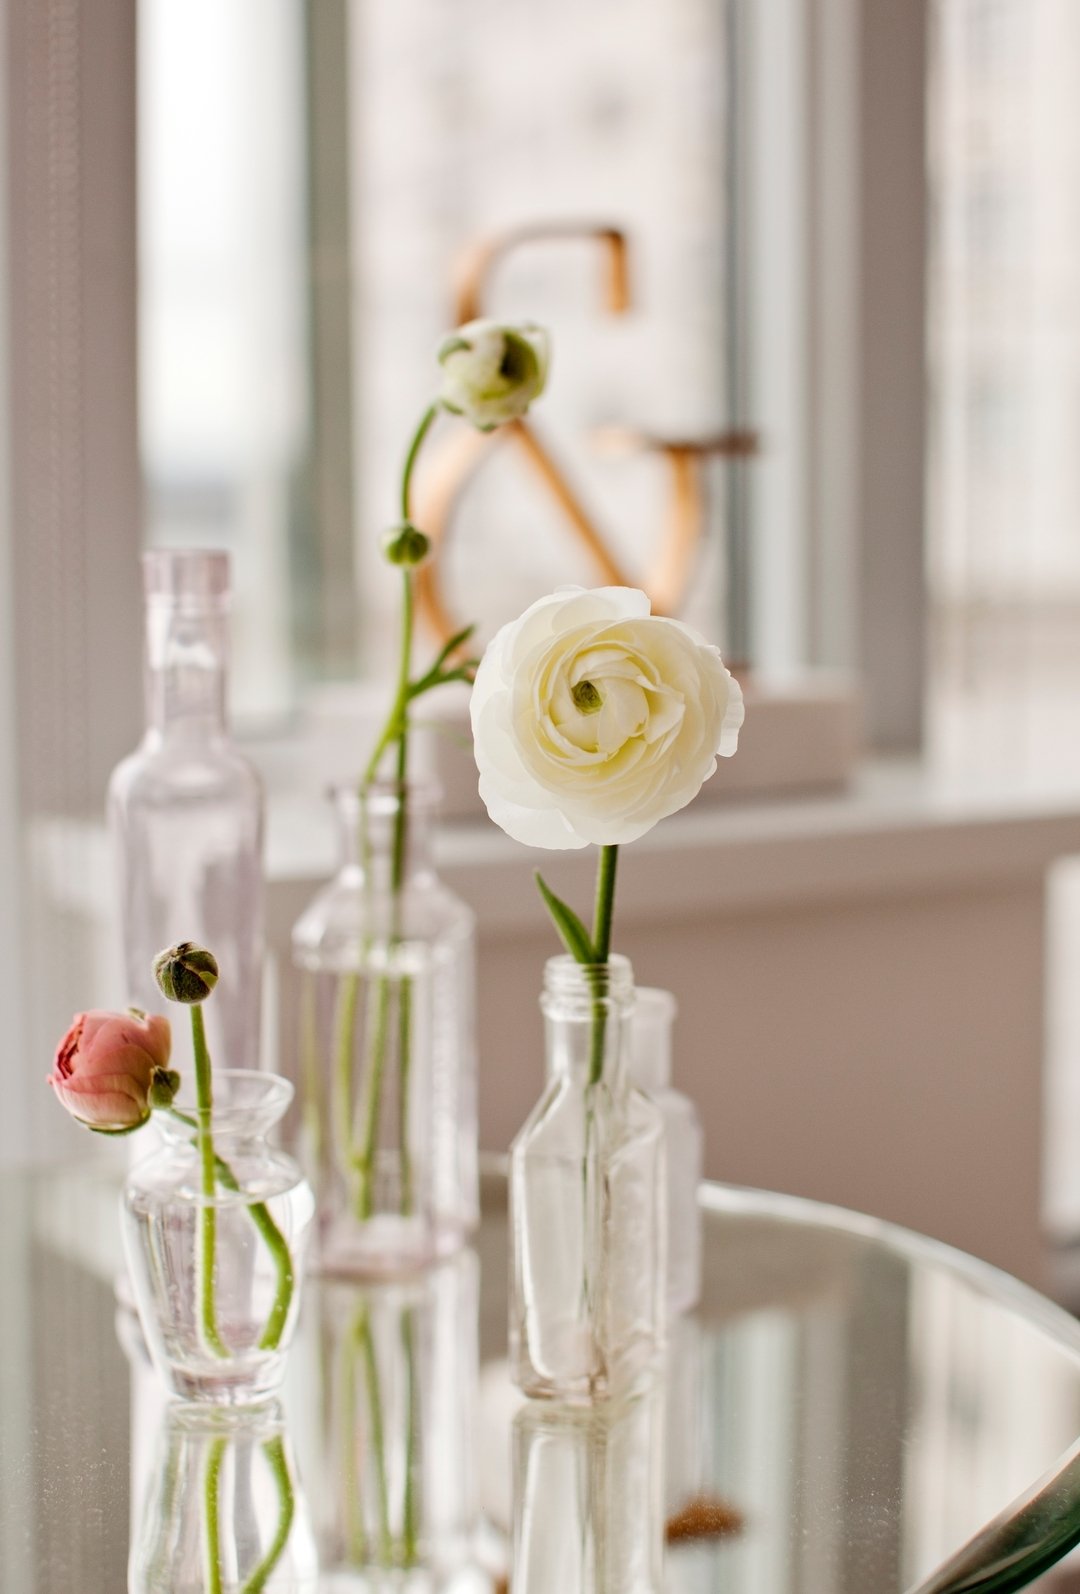 Flower Friday! Ranunculus are a personal favourite. What are yours?

Photo: @janisnicolayphotography